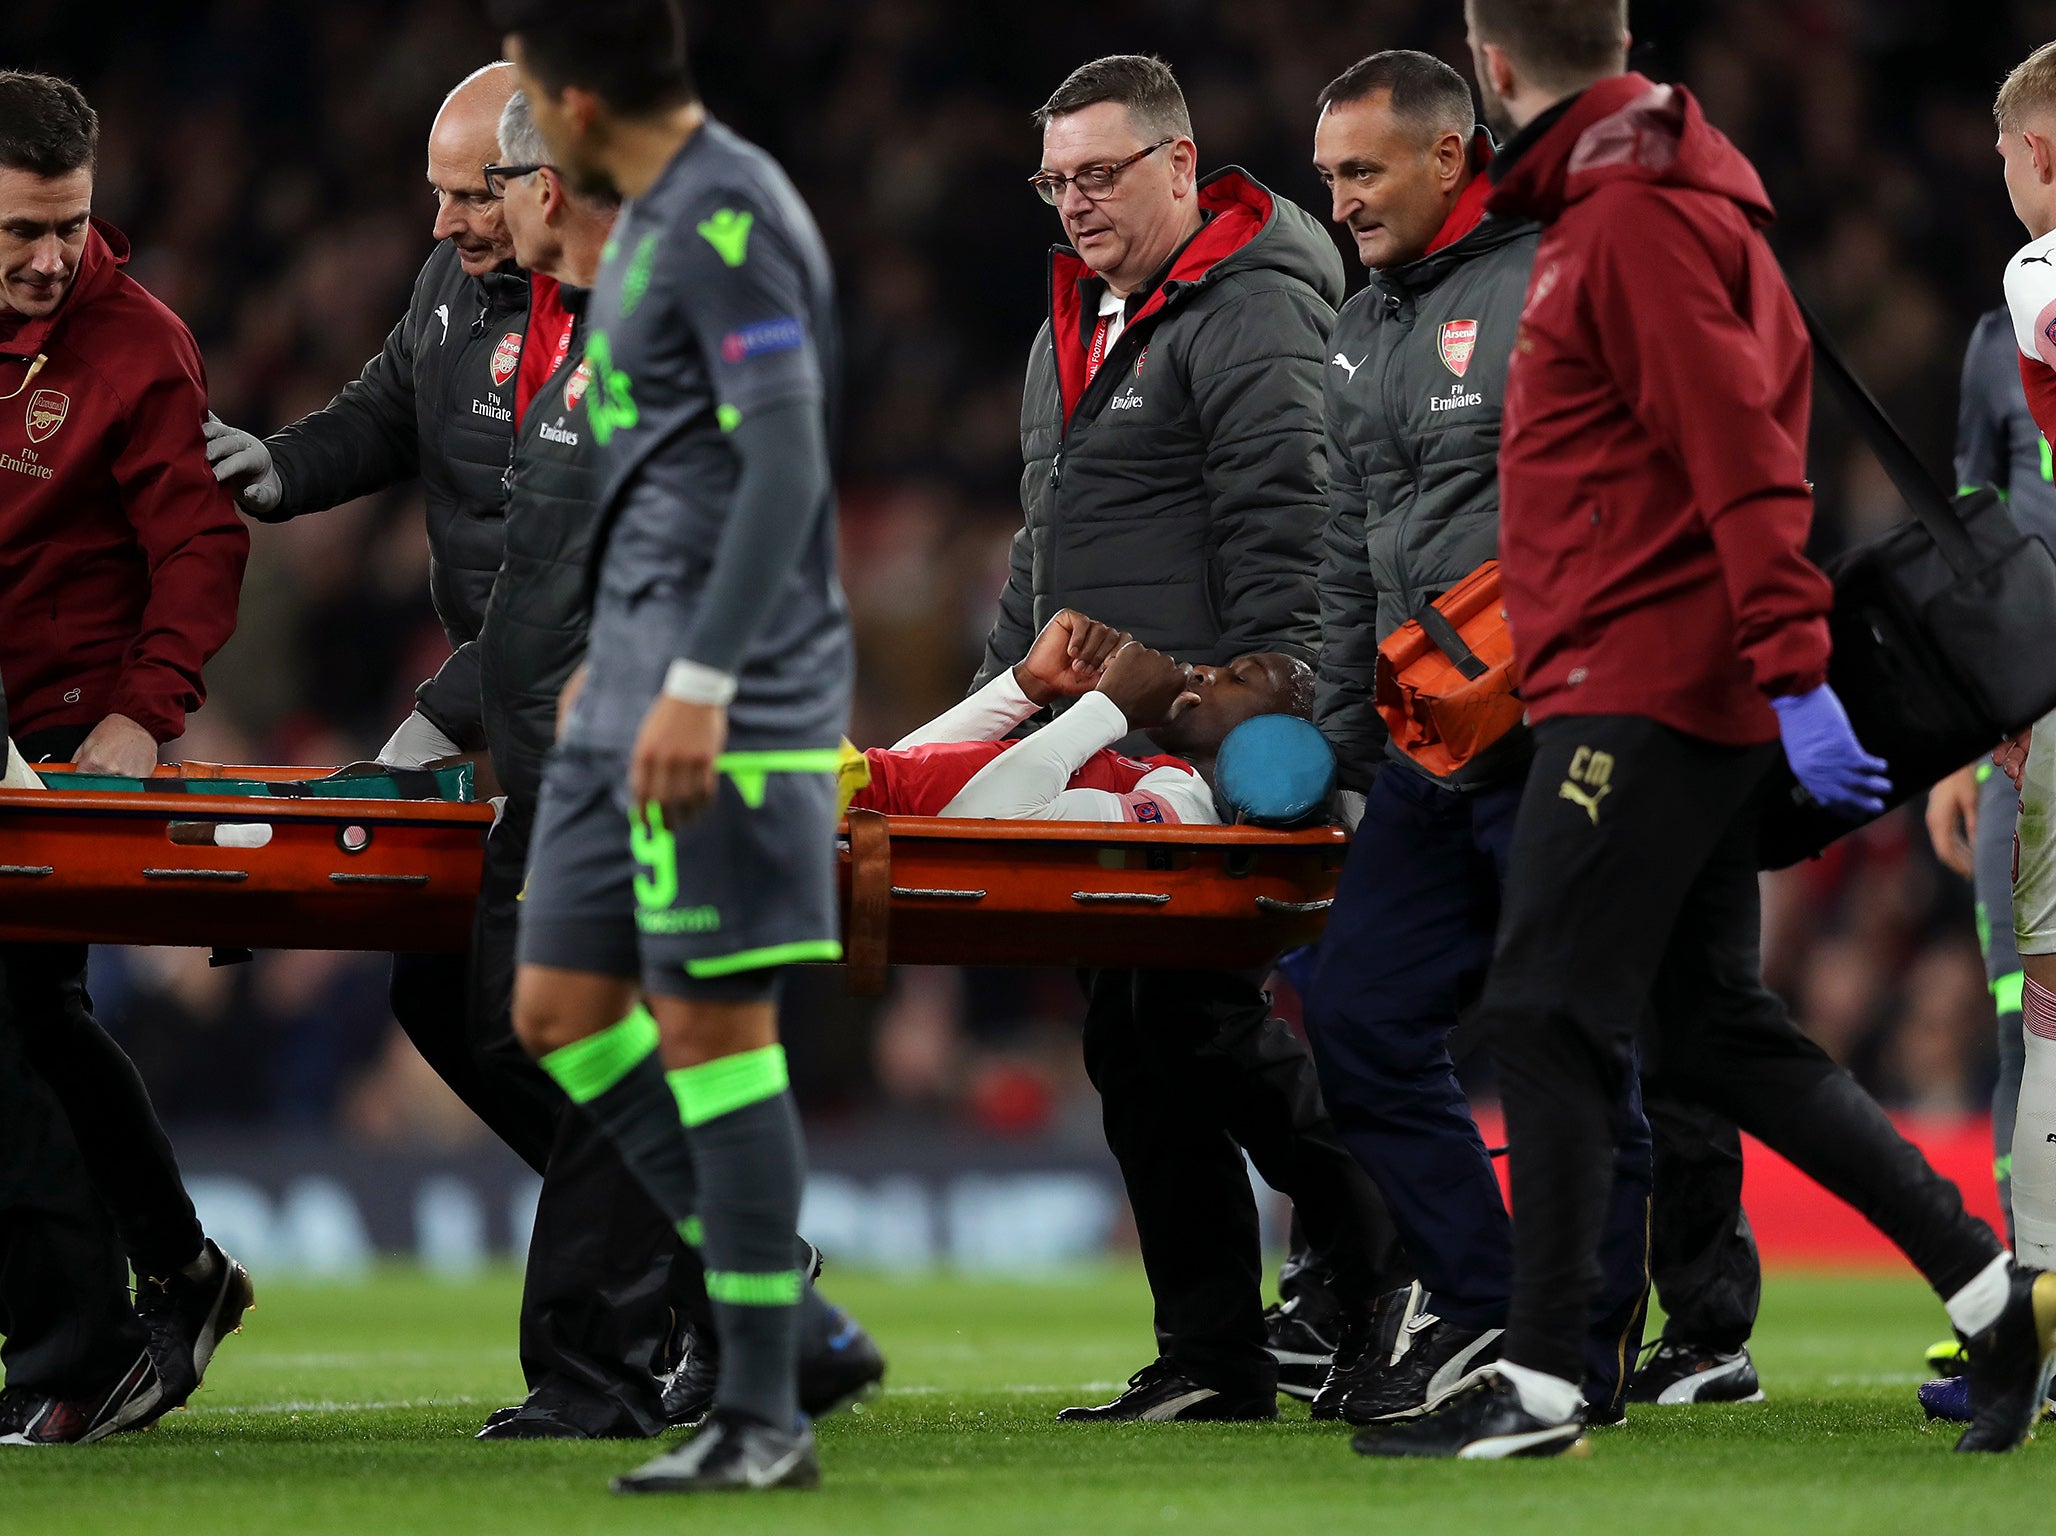 Arsenal manager Unai Emery confirms Danny Welbeck has undergone surgery to repair broken ankle